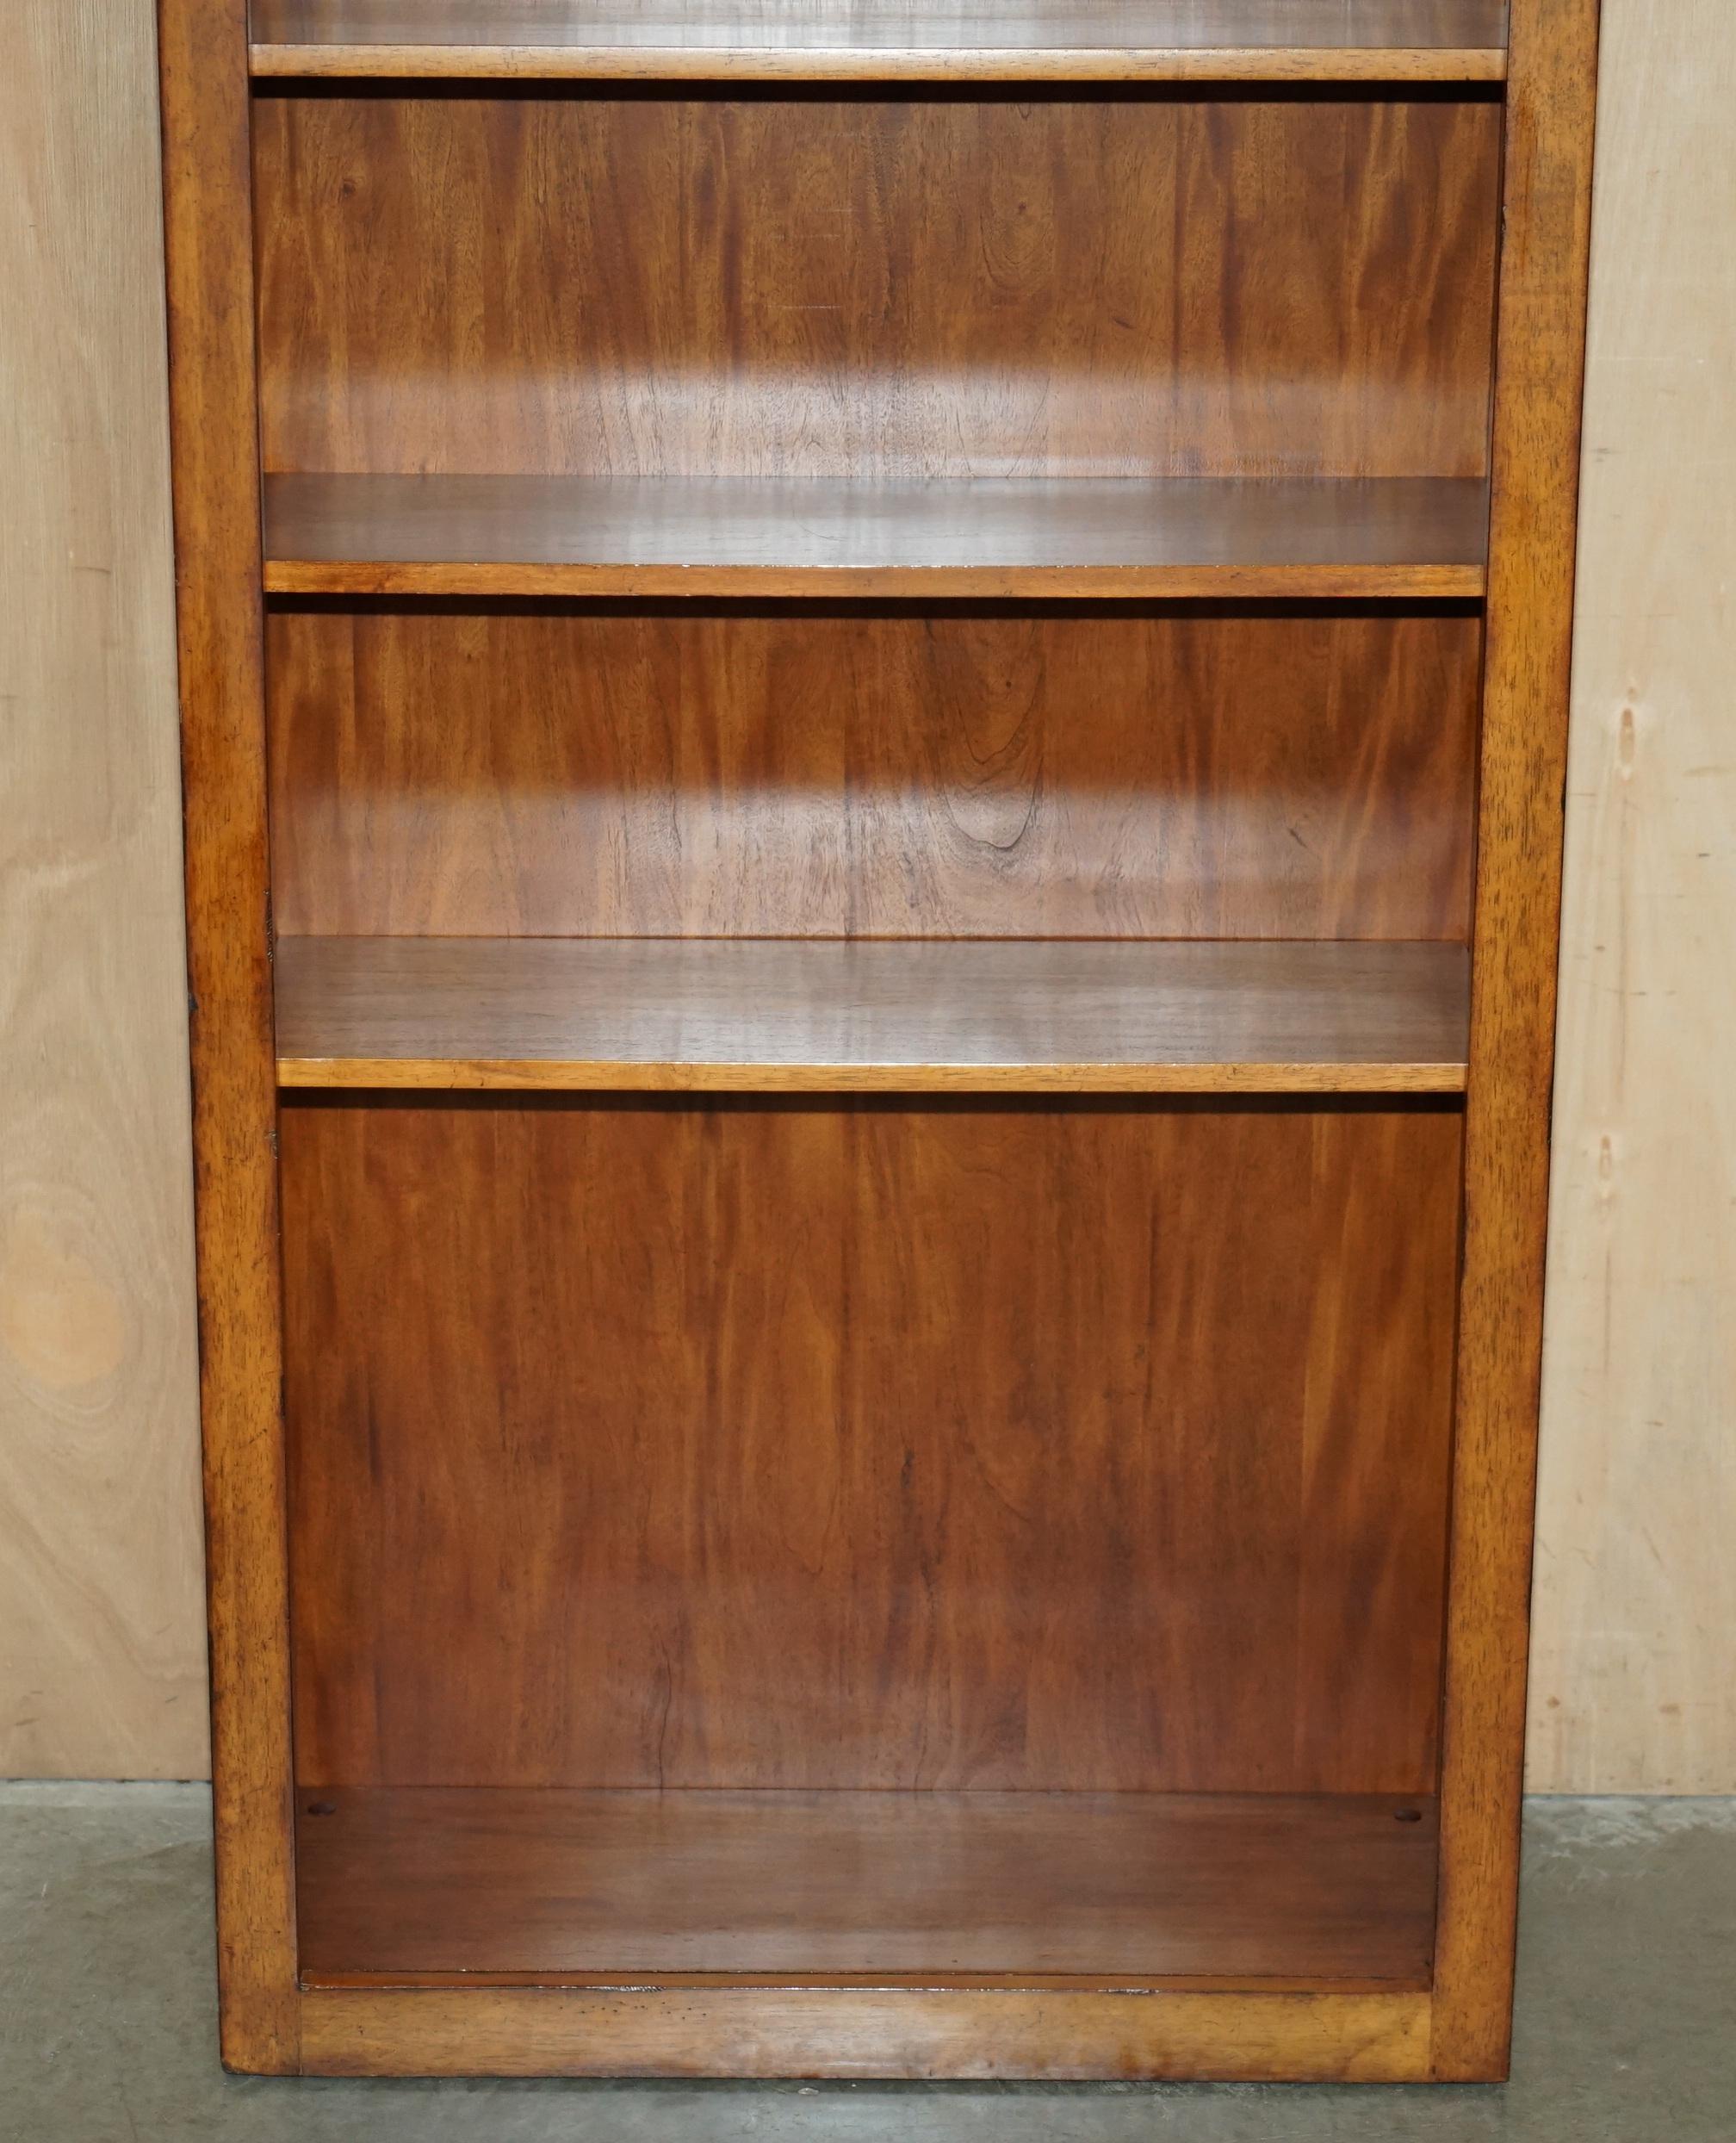 English PAIR OF HARDWOOD FINISH TALL OPEN LIBRARY BOOKCASES BY THE DESiGNER ETHAN ALLEN